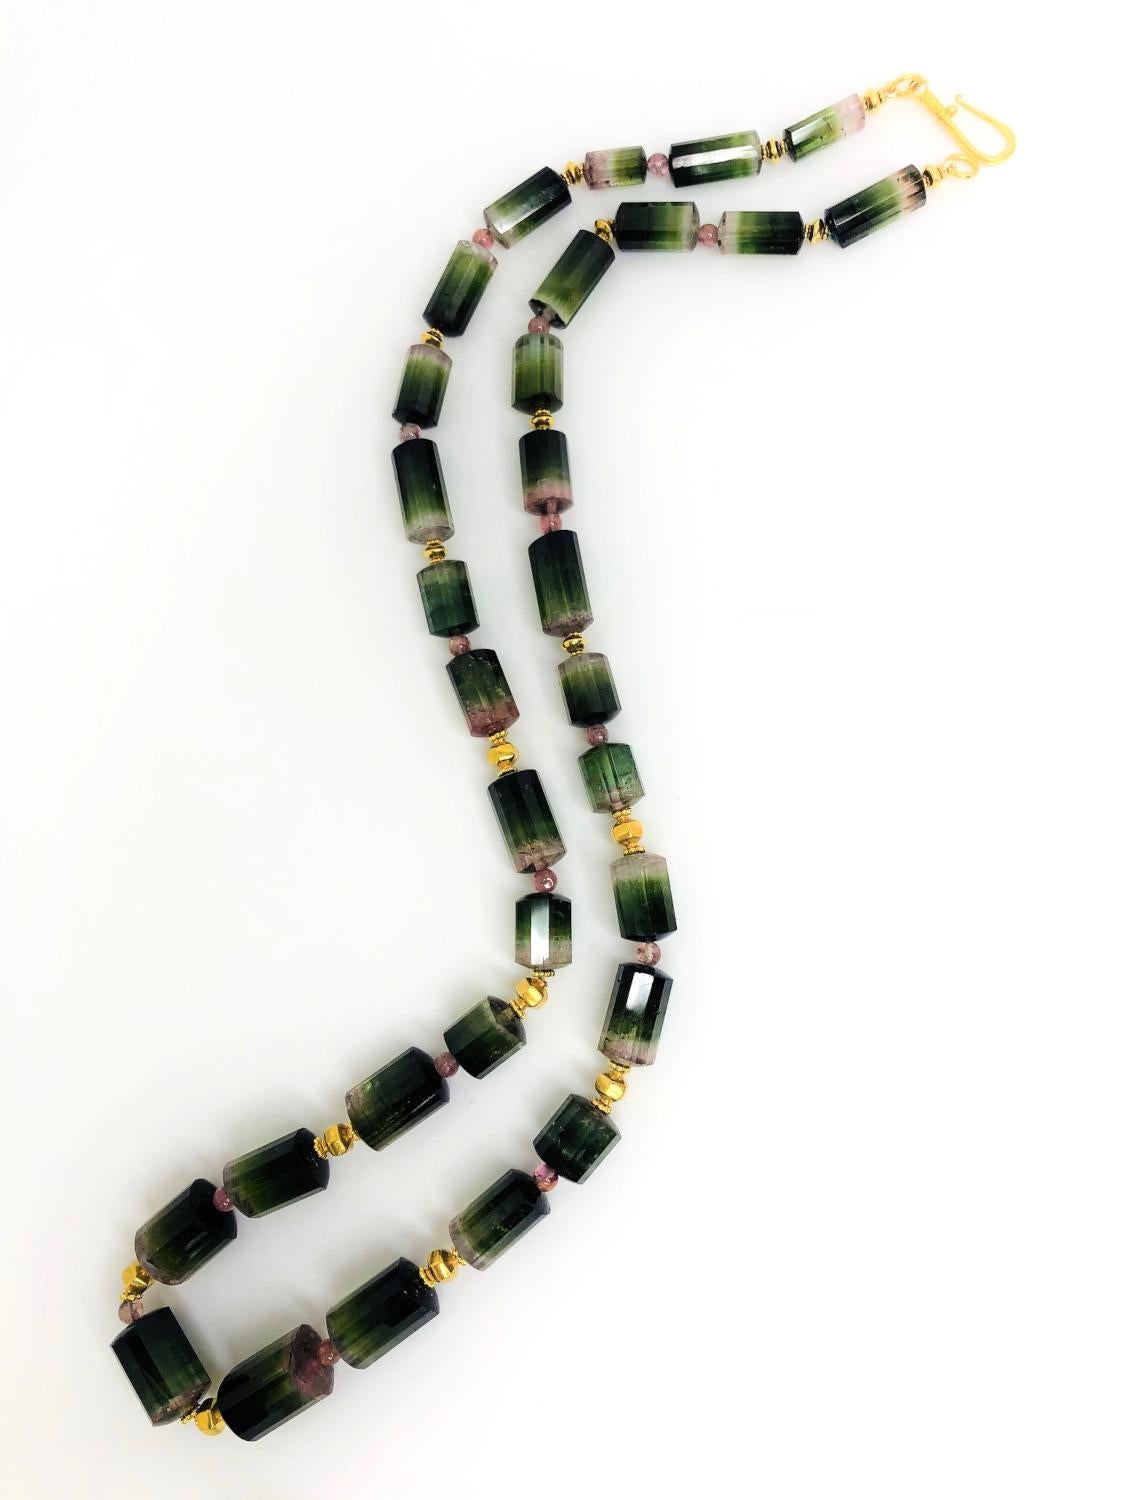 This unusual necklace features 395 carats of tourmaline crystal beads that have been hand strung with 22k yellow gold accents! The modified cylindrical shape beads are a collection of bi-colored and tri-colored tourmaline in a range of greens, pinks